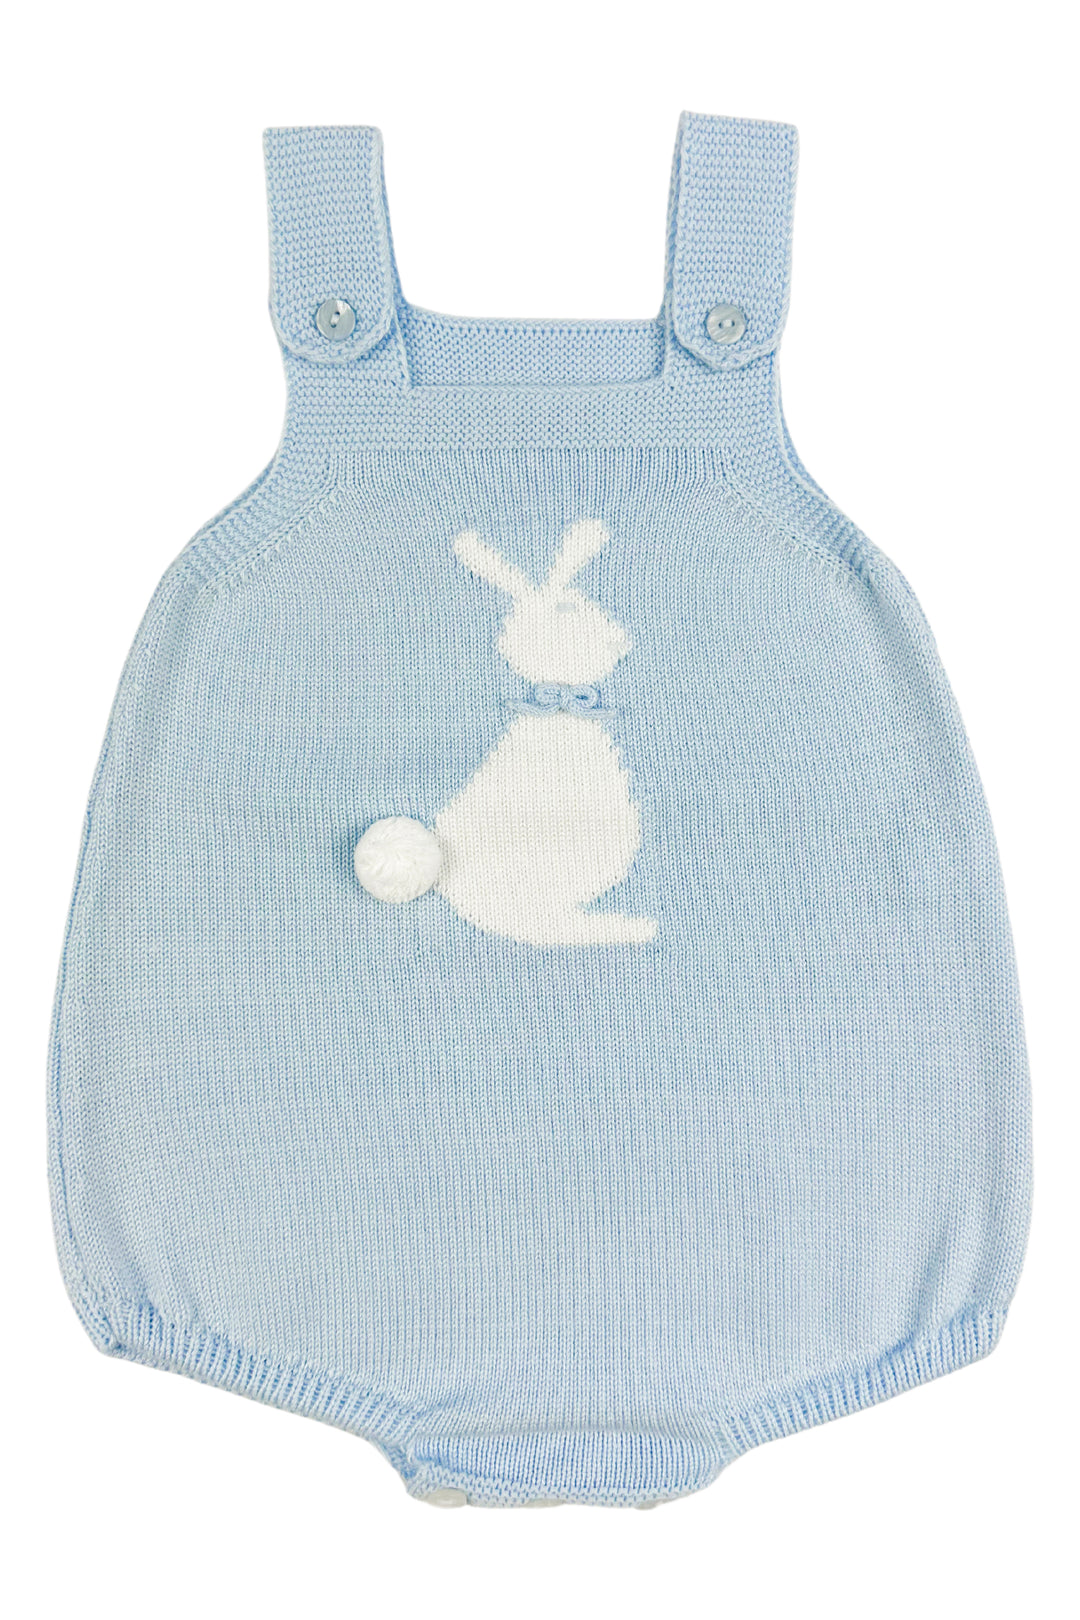 Granlei "Roux" Blue Knit Bunny Dungaree Romper | iphoneandroidapplications